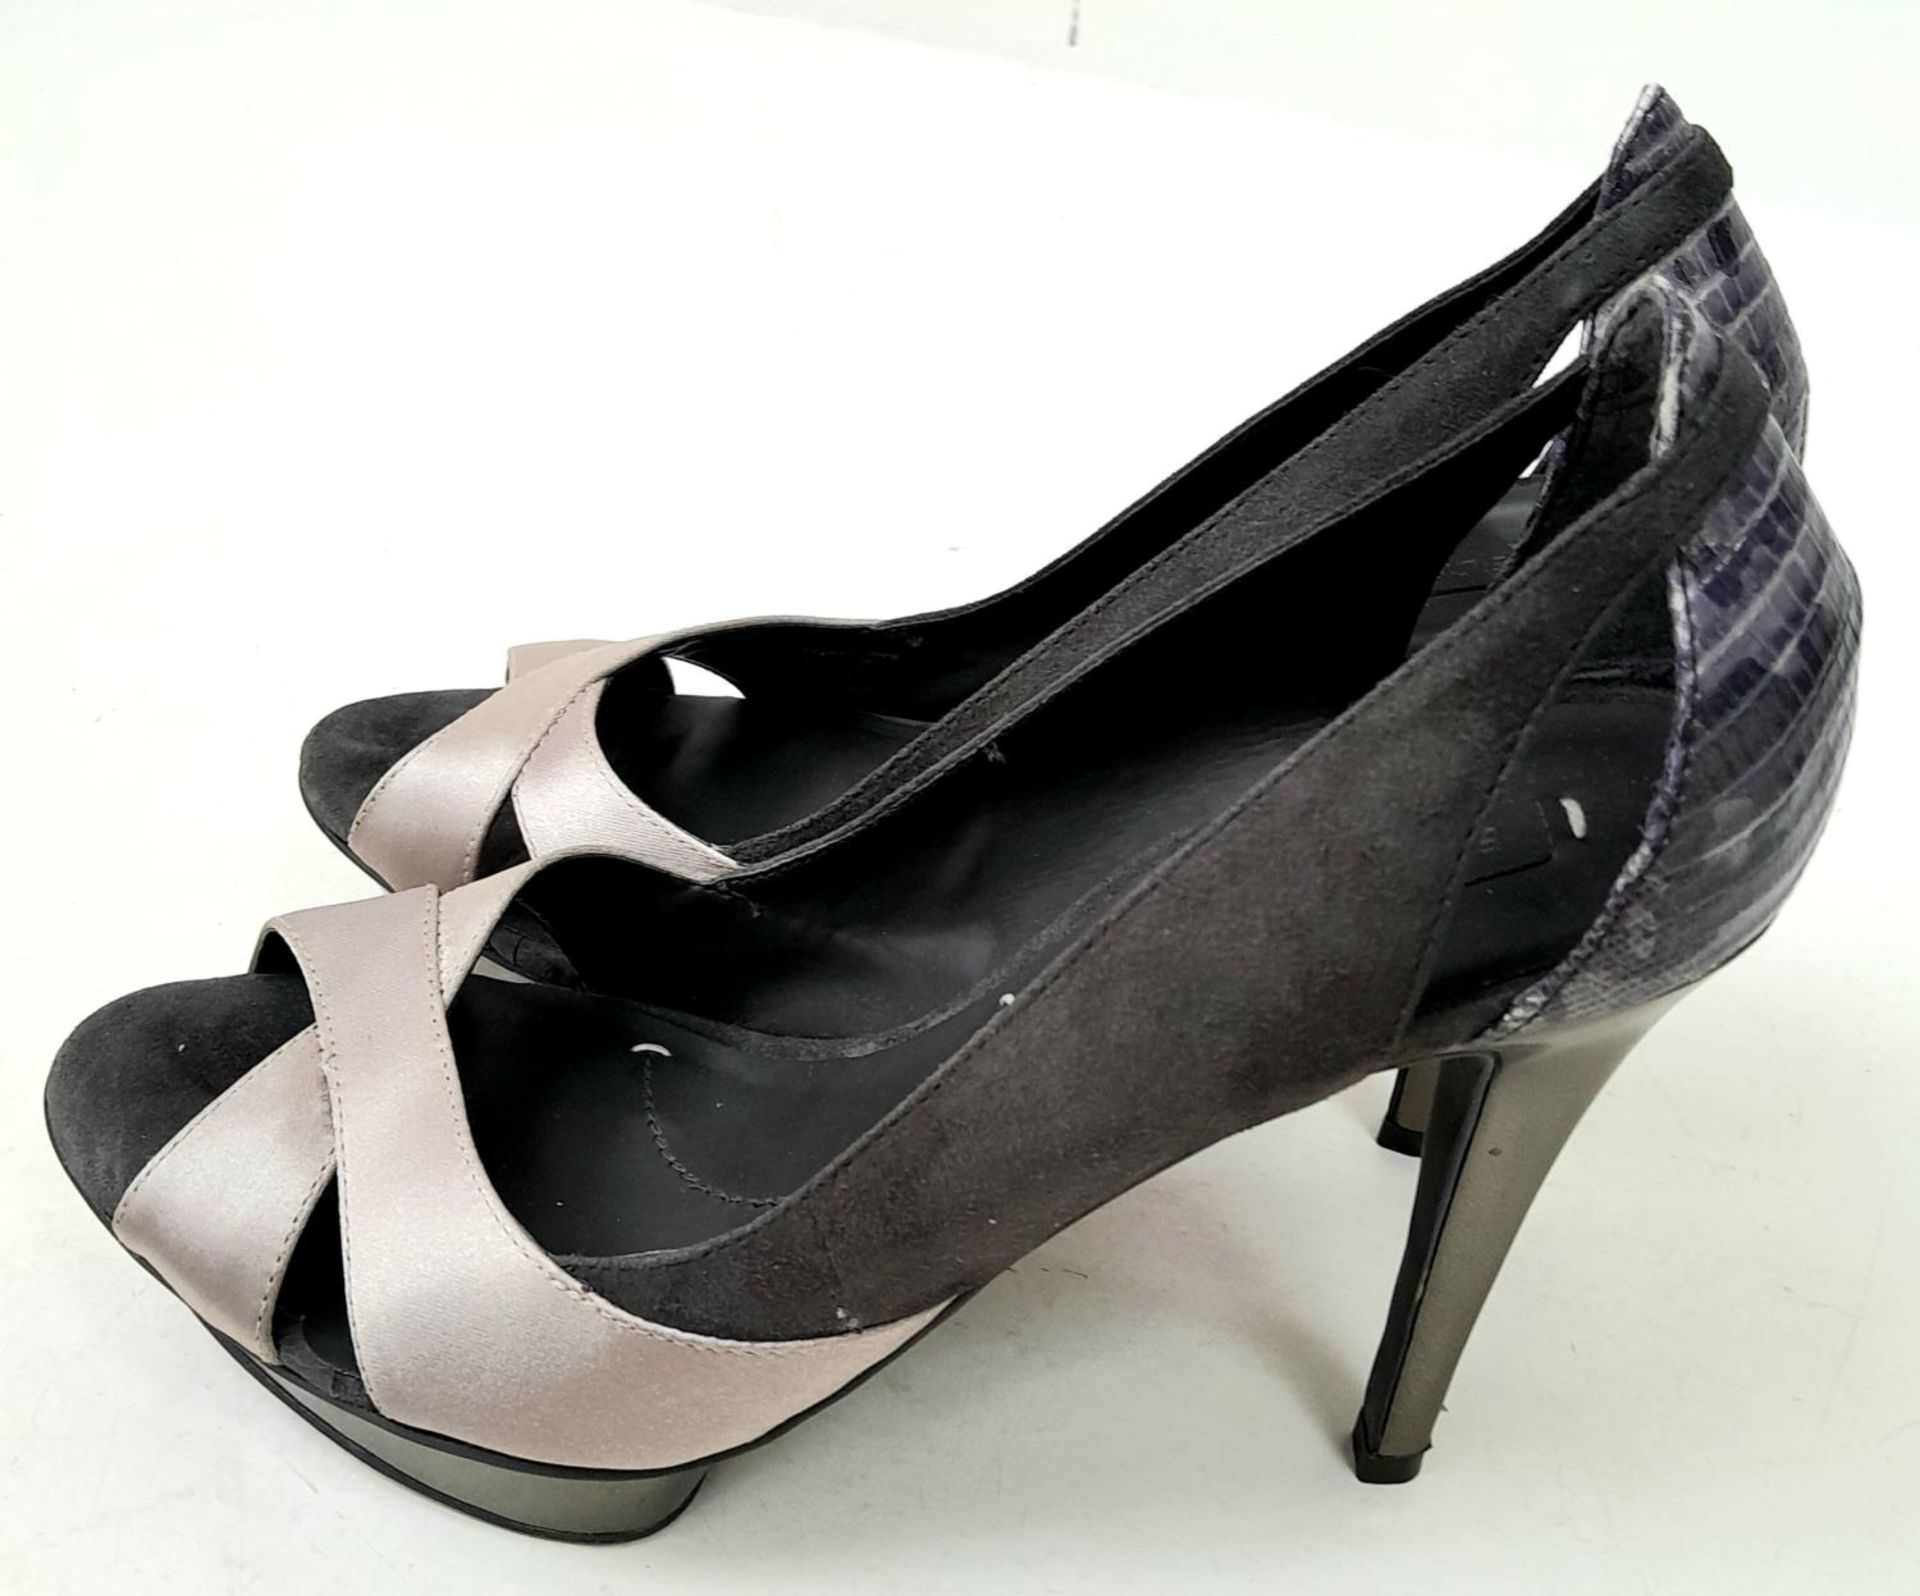 A pair of lightly used high heel (4") ladies shoes by Max Mara - Image 5 of 6